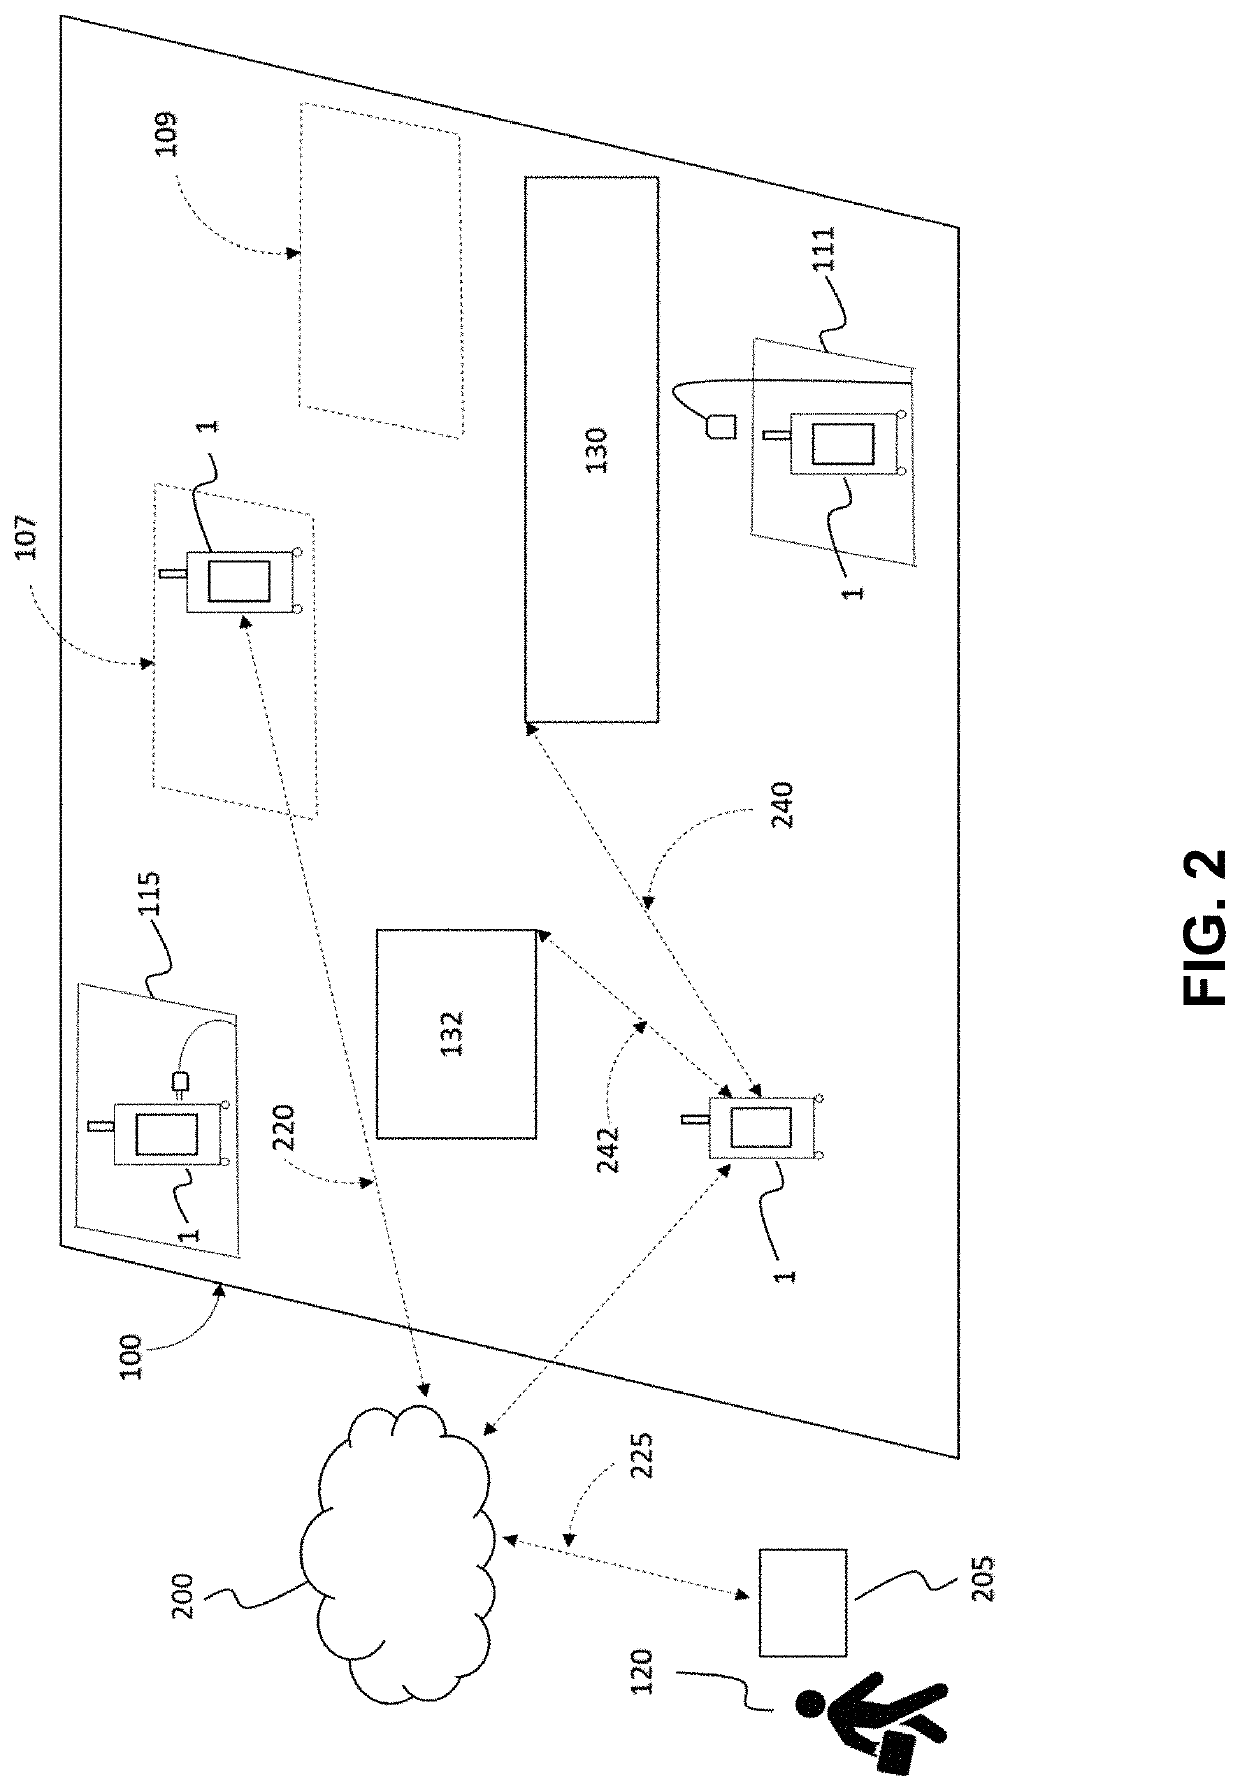 Mobile monitoring device for controlled contamination areas